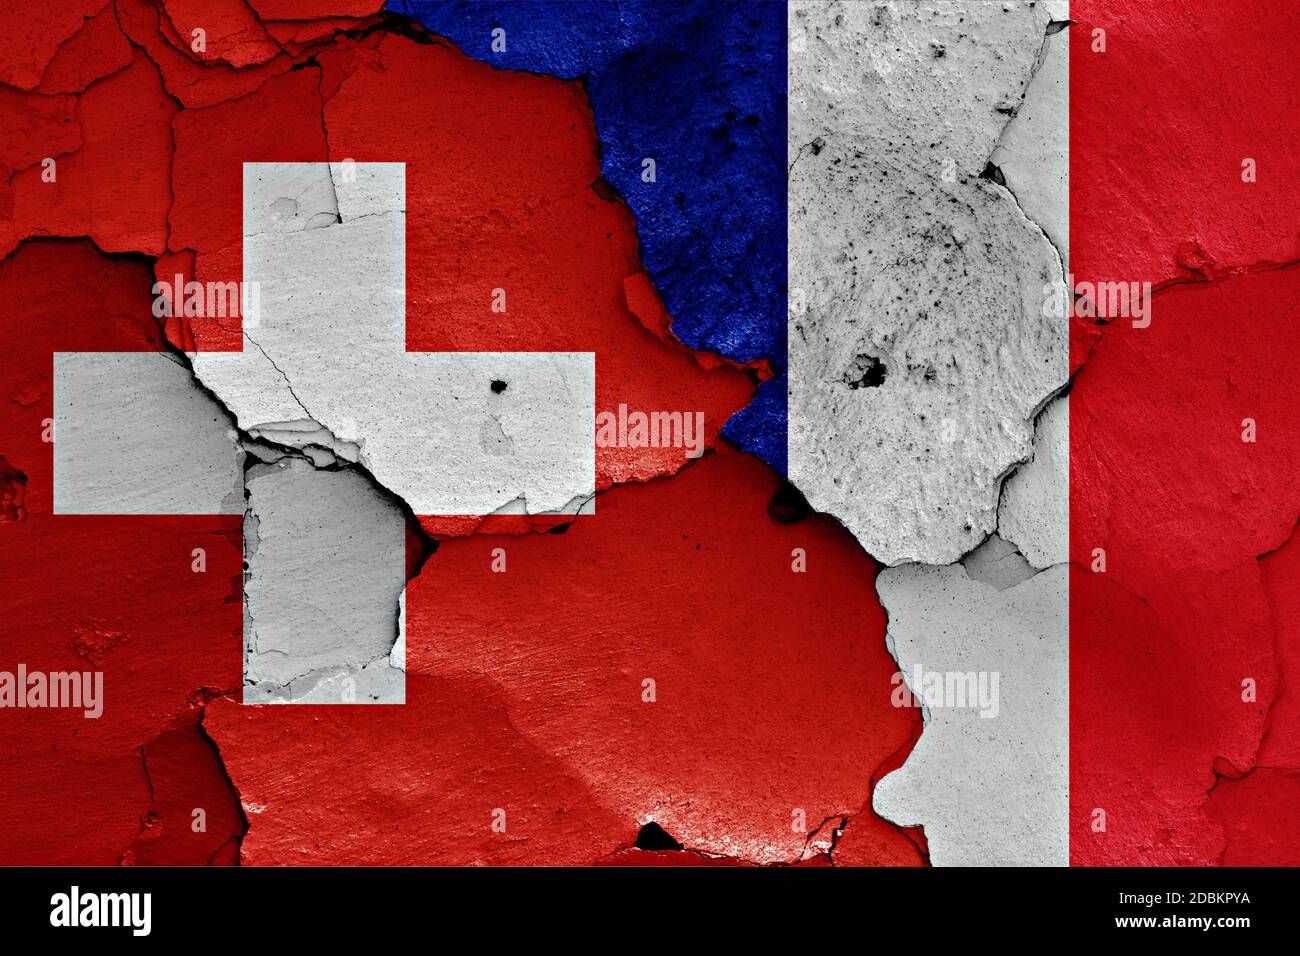 France Switzerland Relations High Resolution Stock Photography and Images -  Alamy